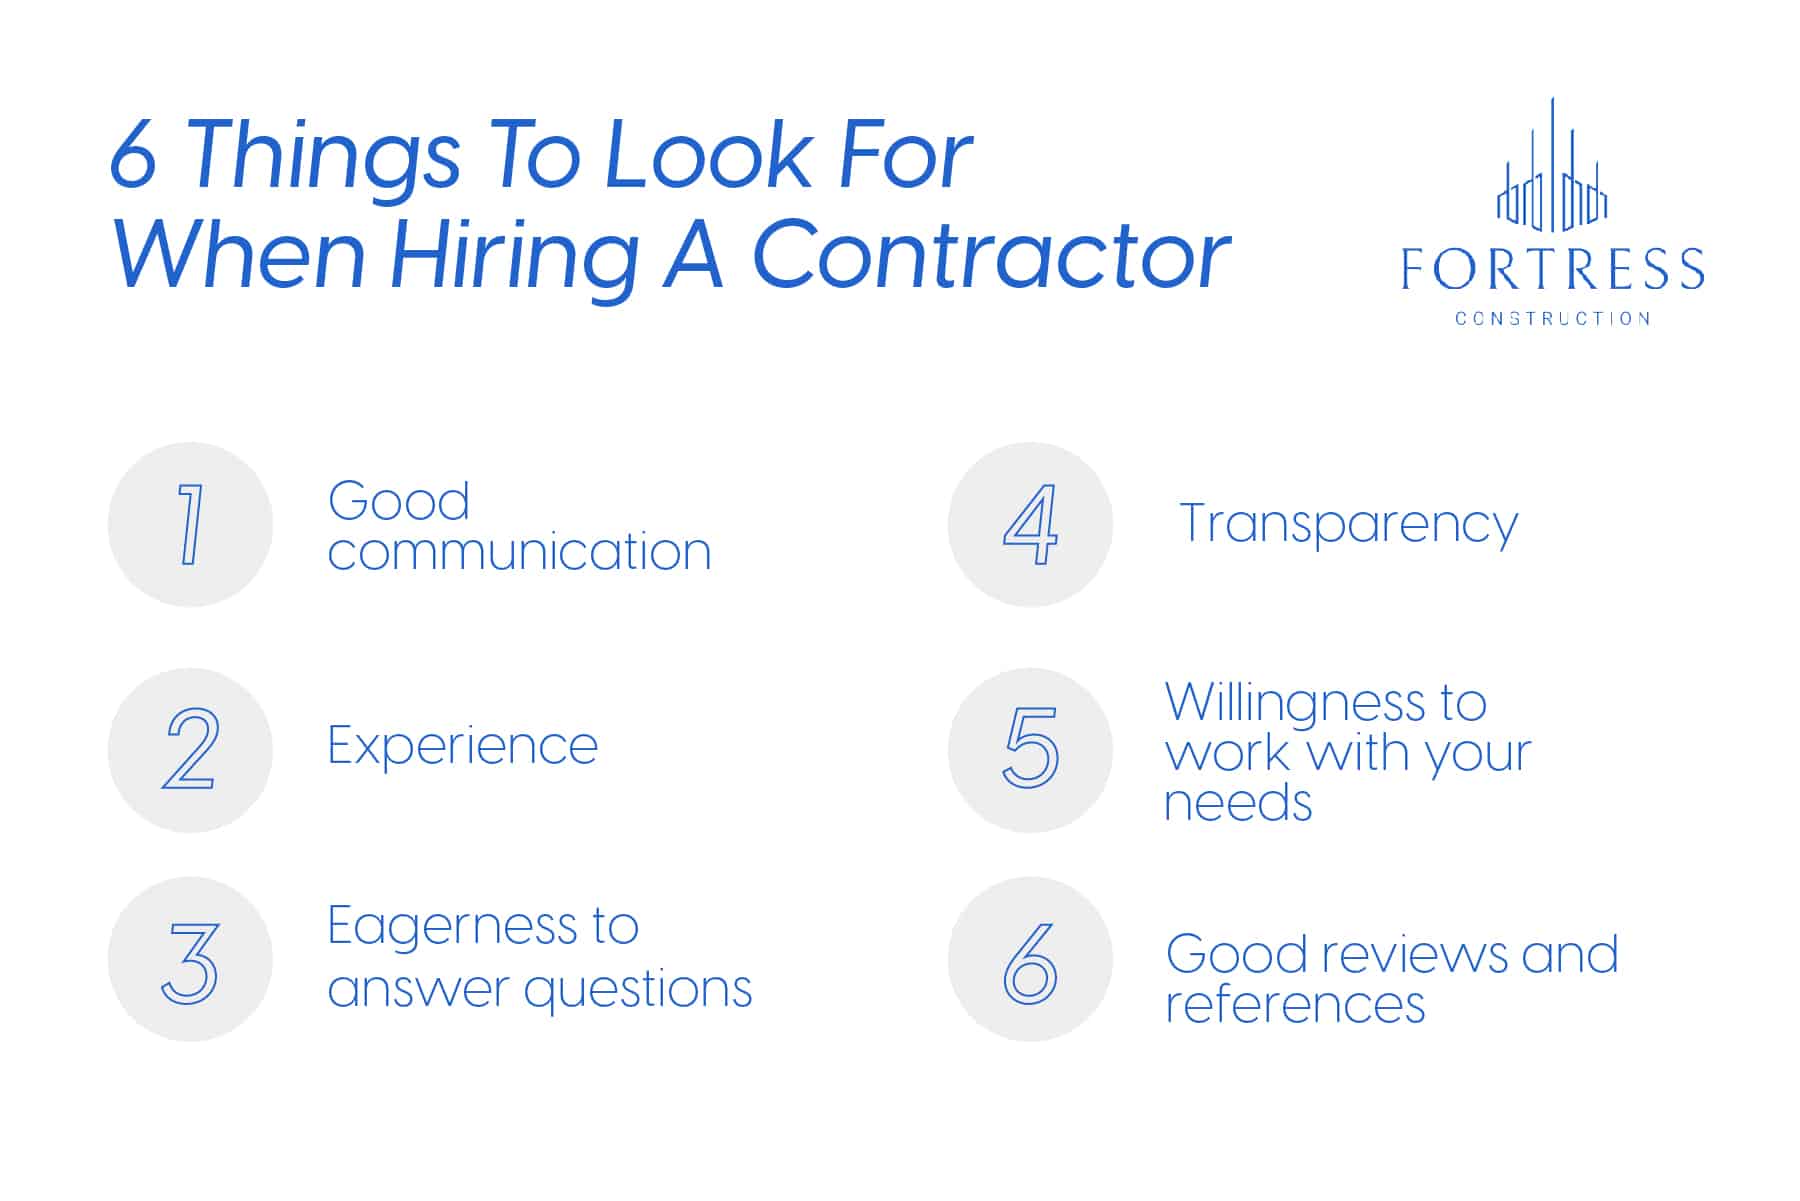 6 tings to look for when hiring a contractor